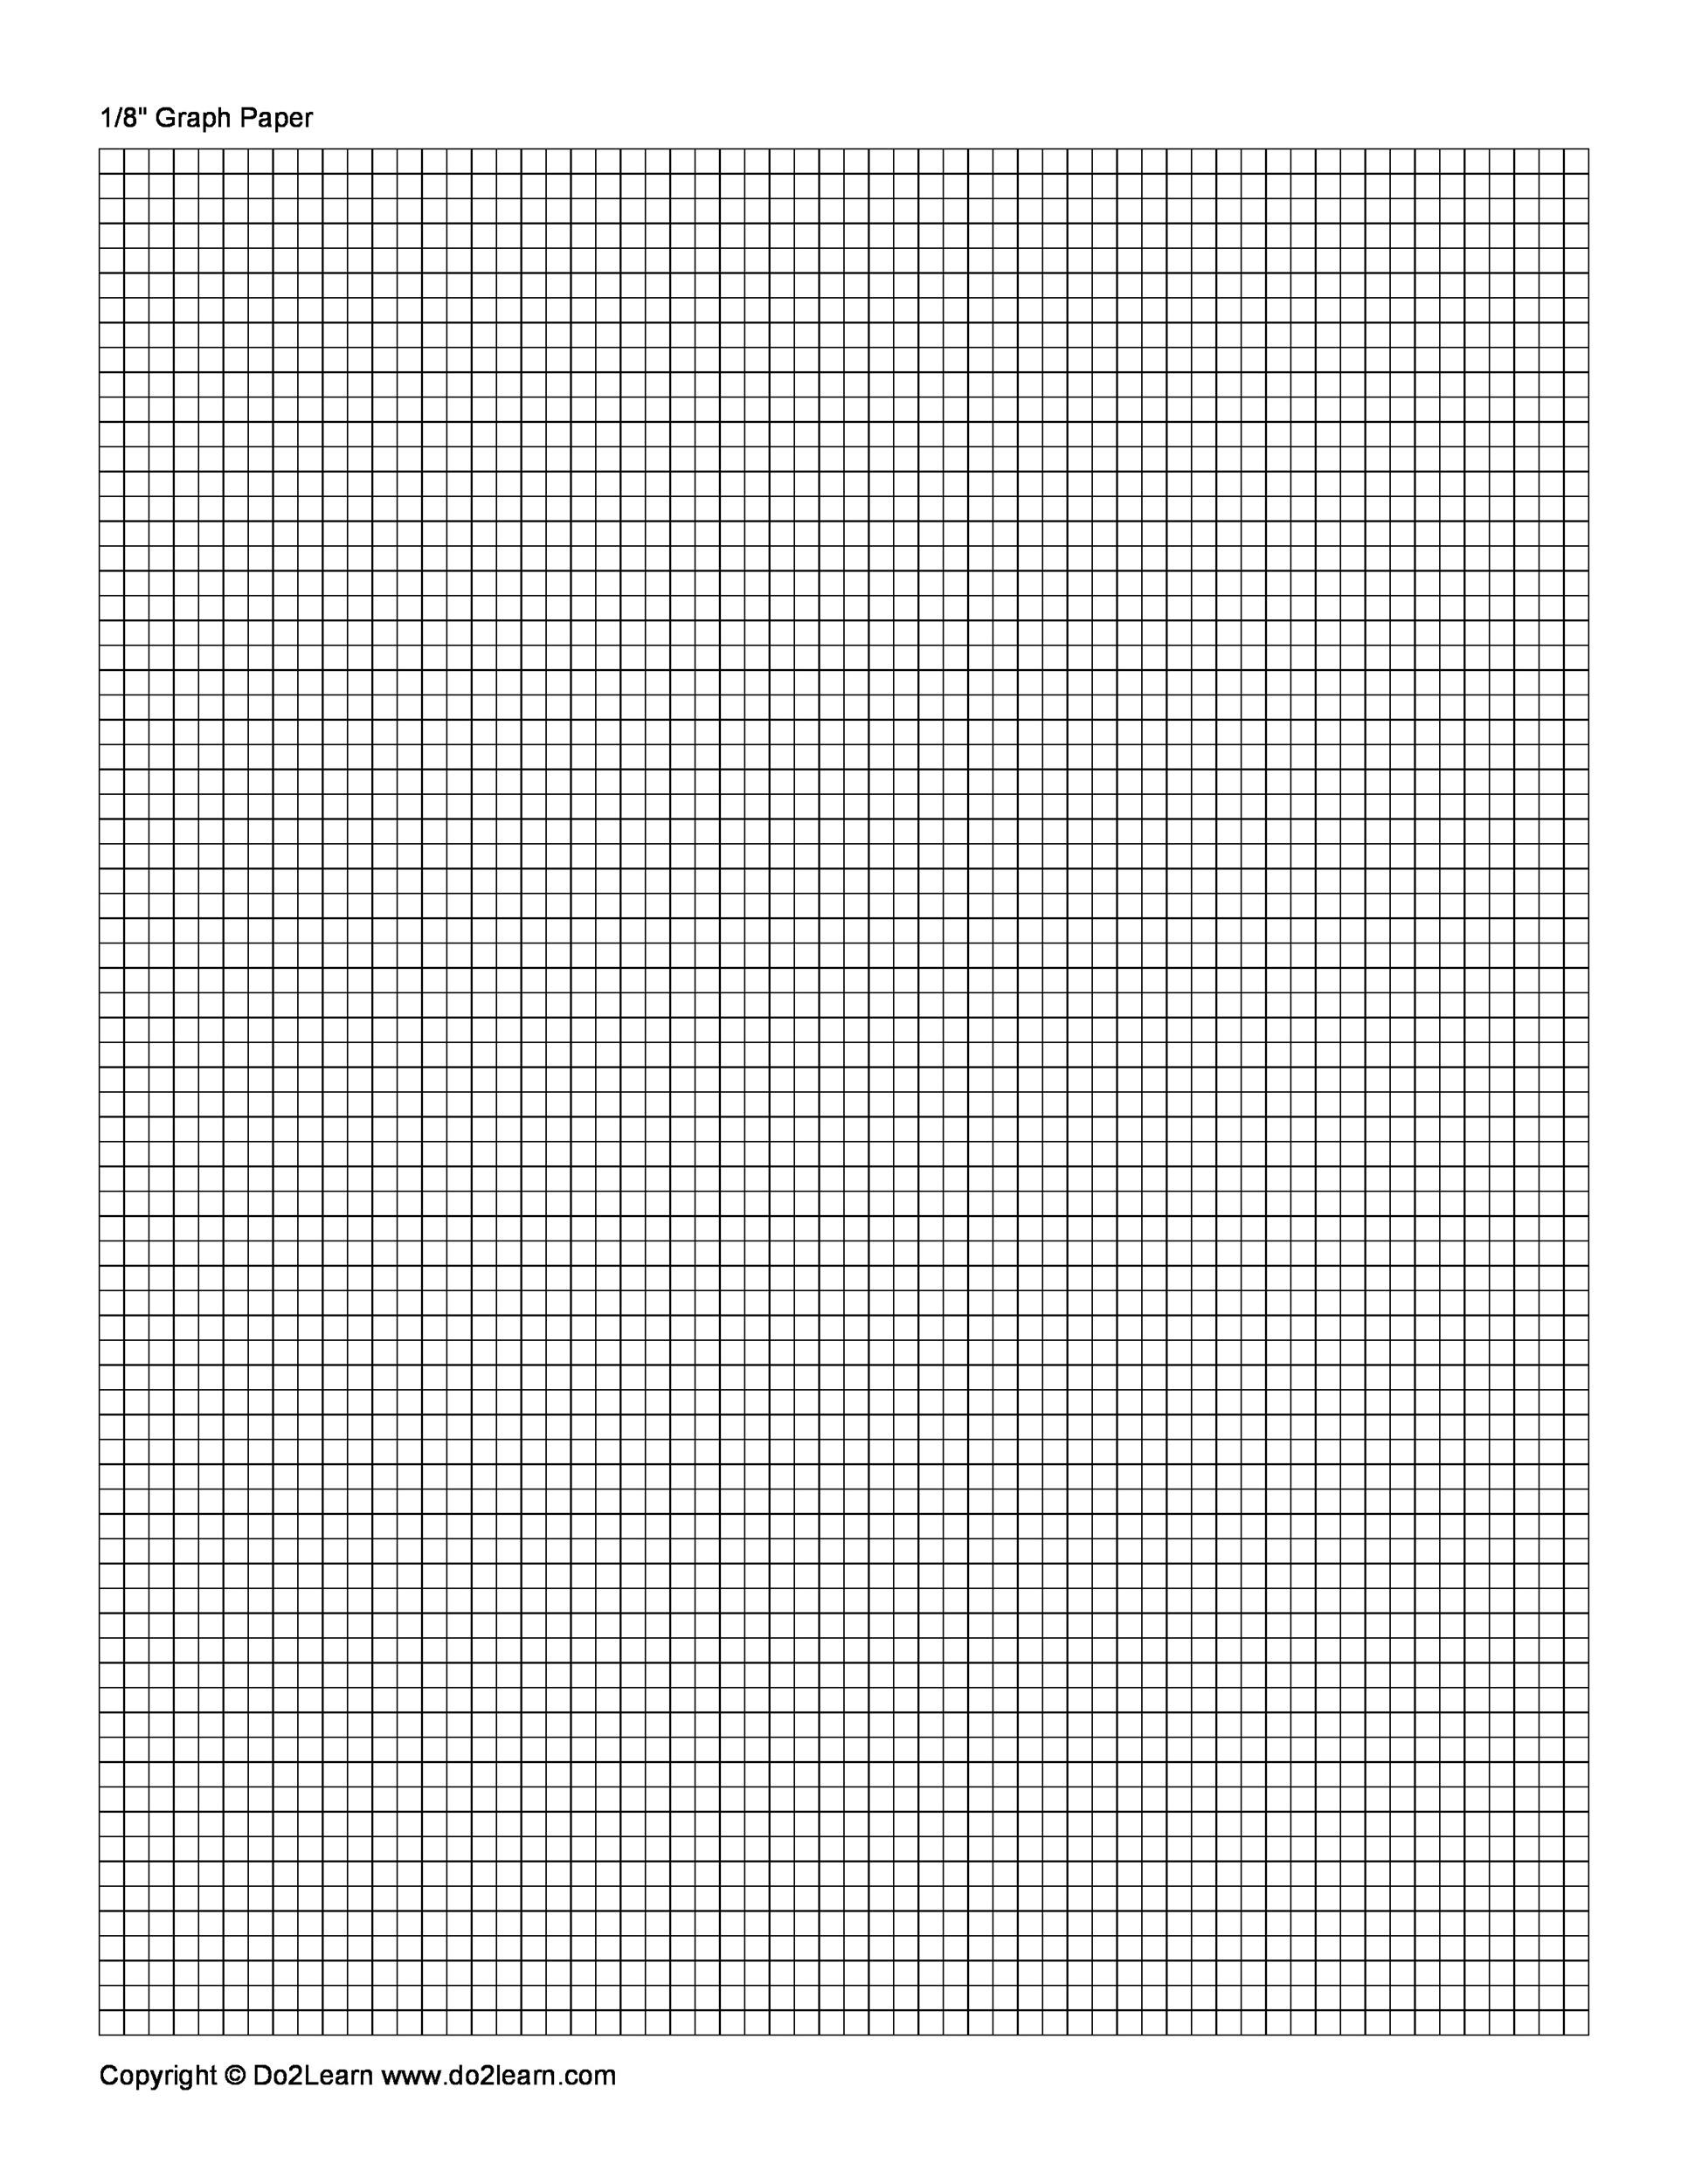 Can I Print My Own Graph Paper